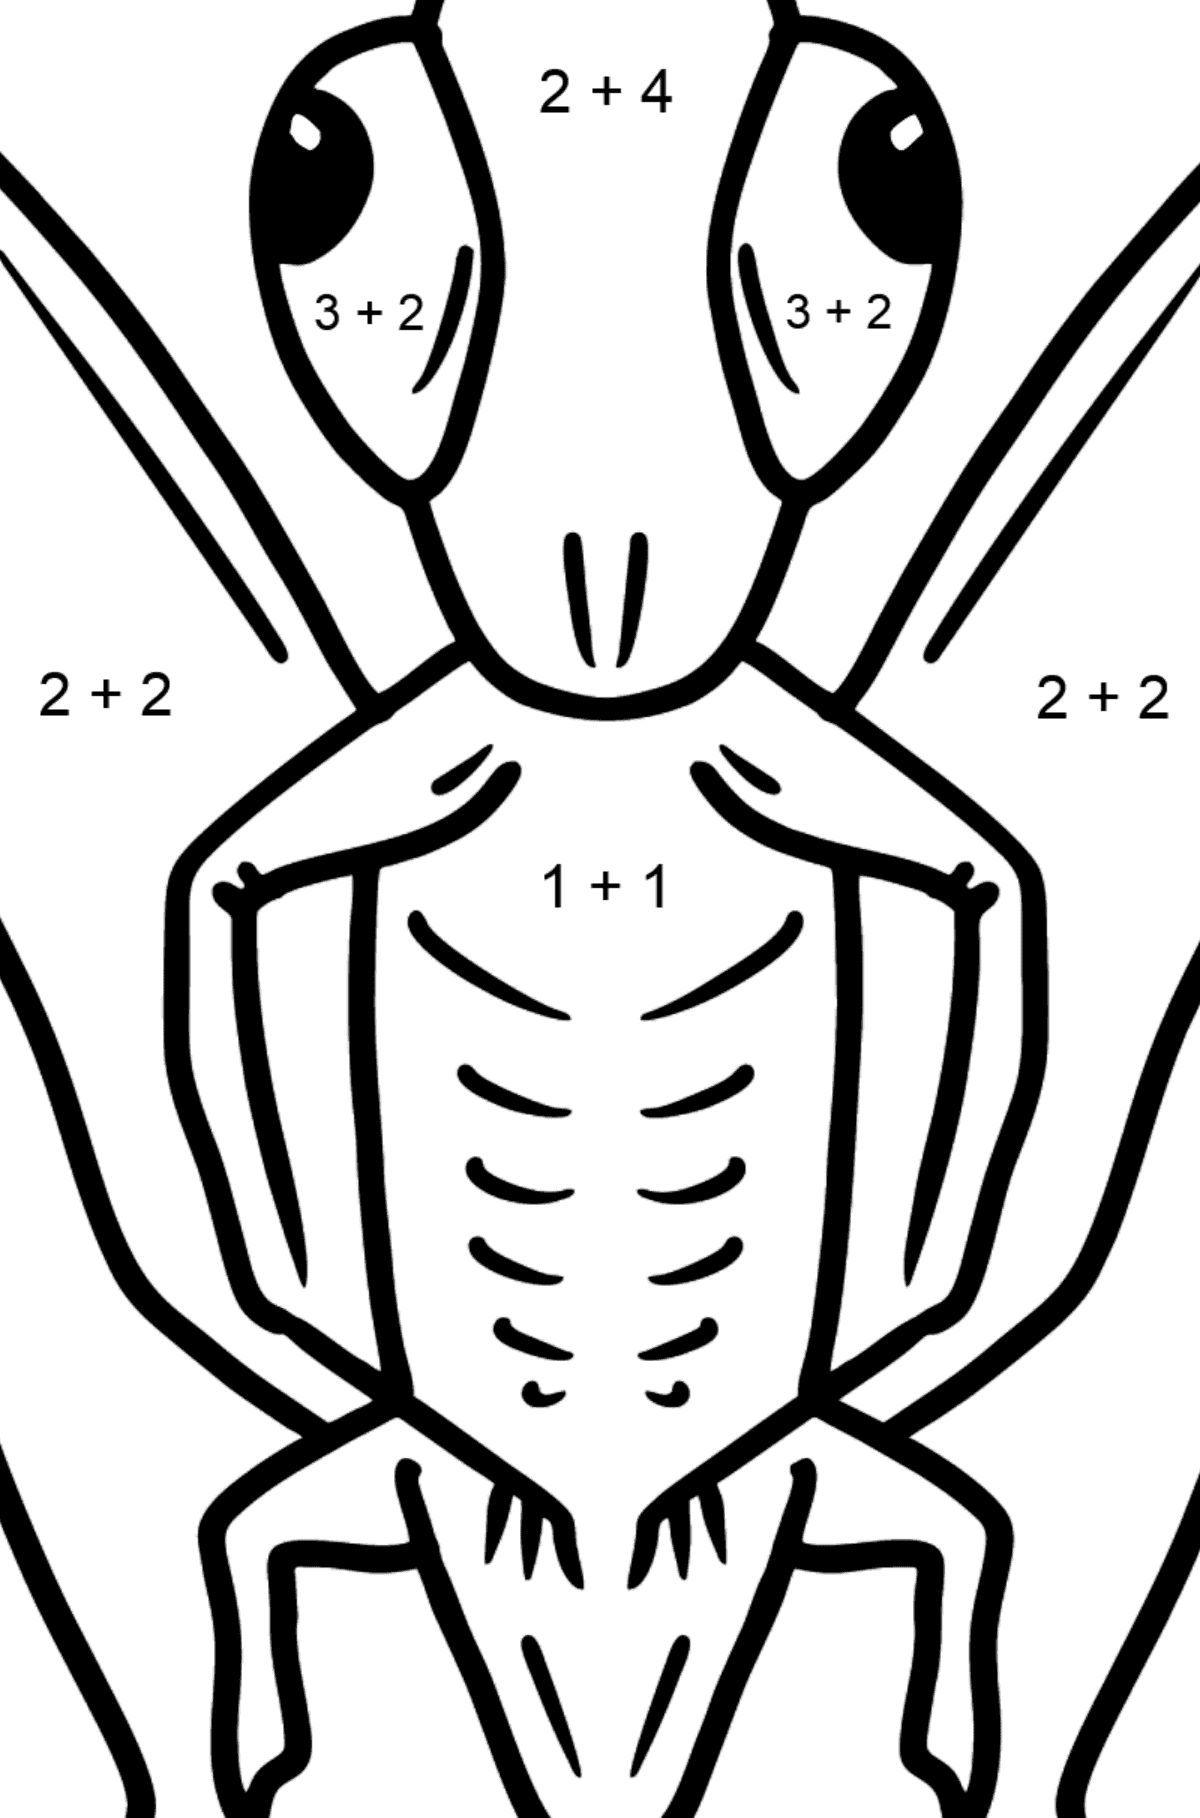 Grasshopper coloring page - Math Coloring - Addition for Kids